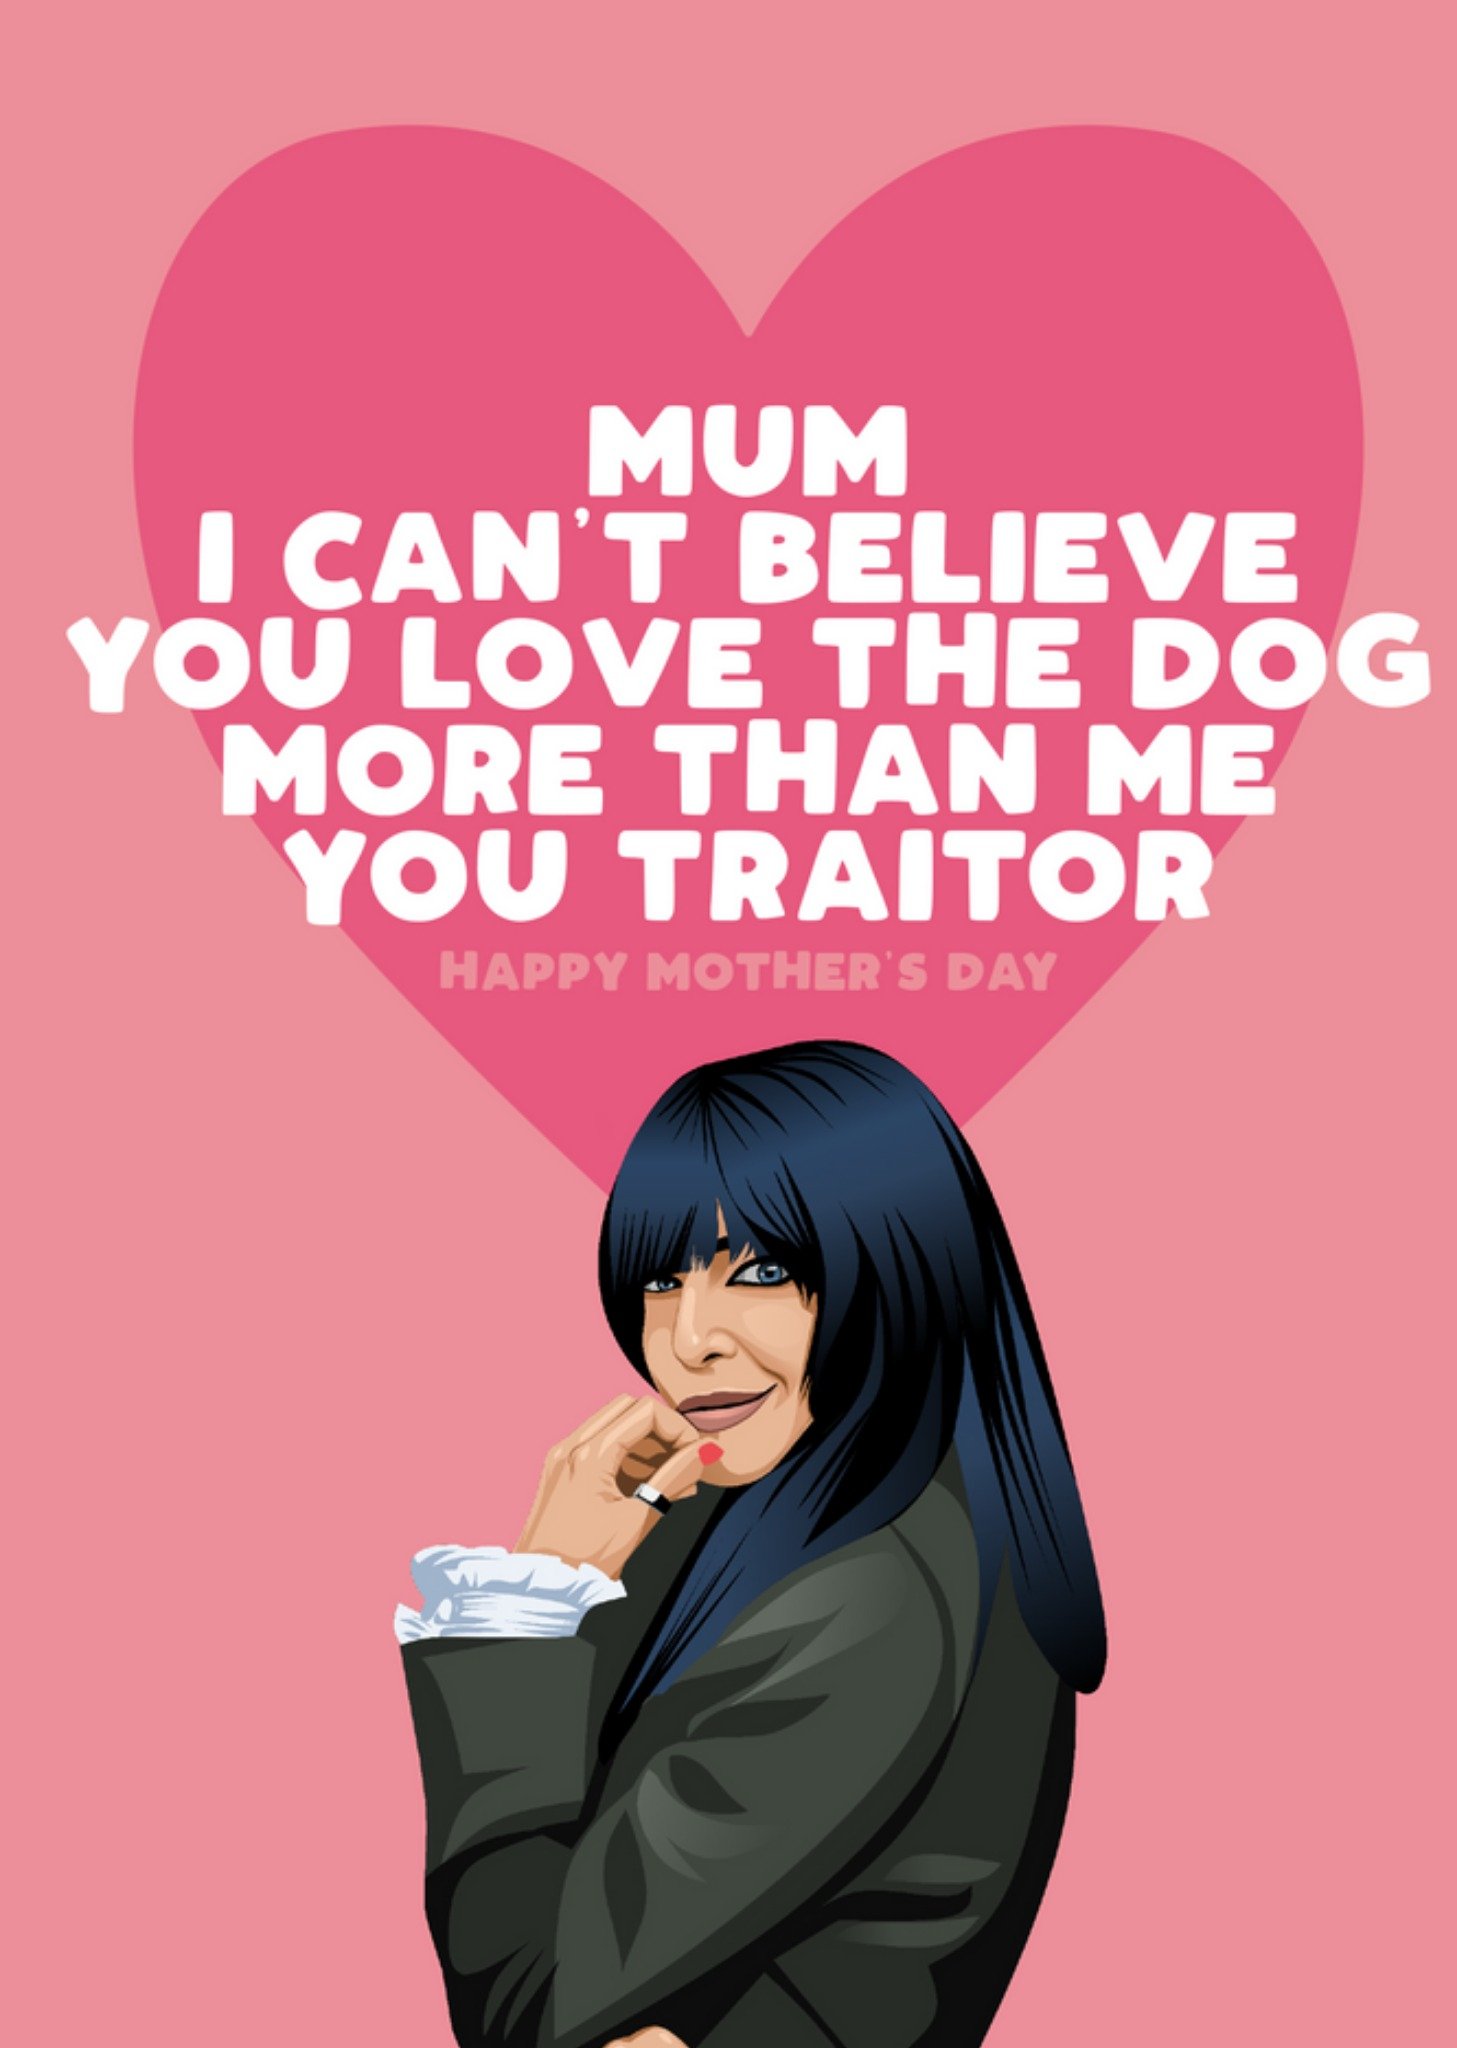 Moonpig Mum I Can't Believe You Love The Dog More Than Me You Traitor Card Ecard